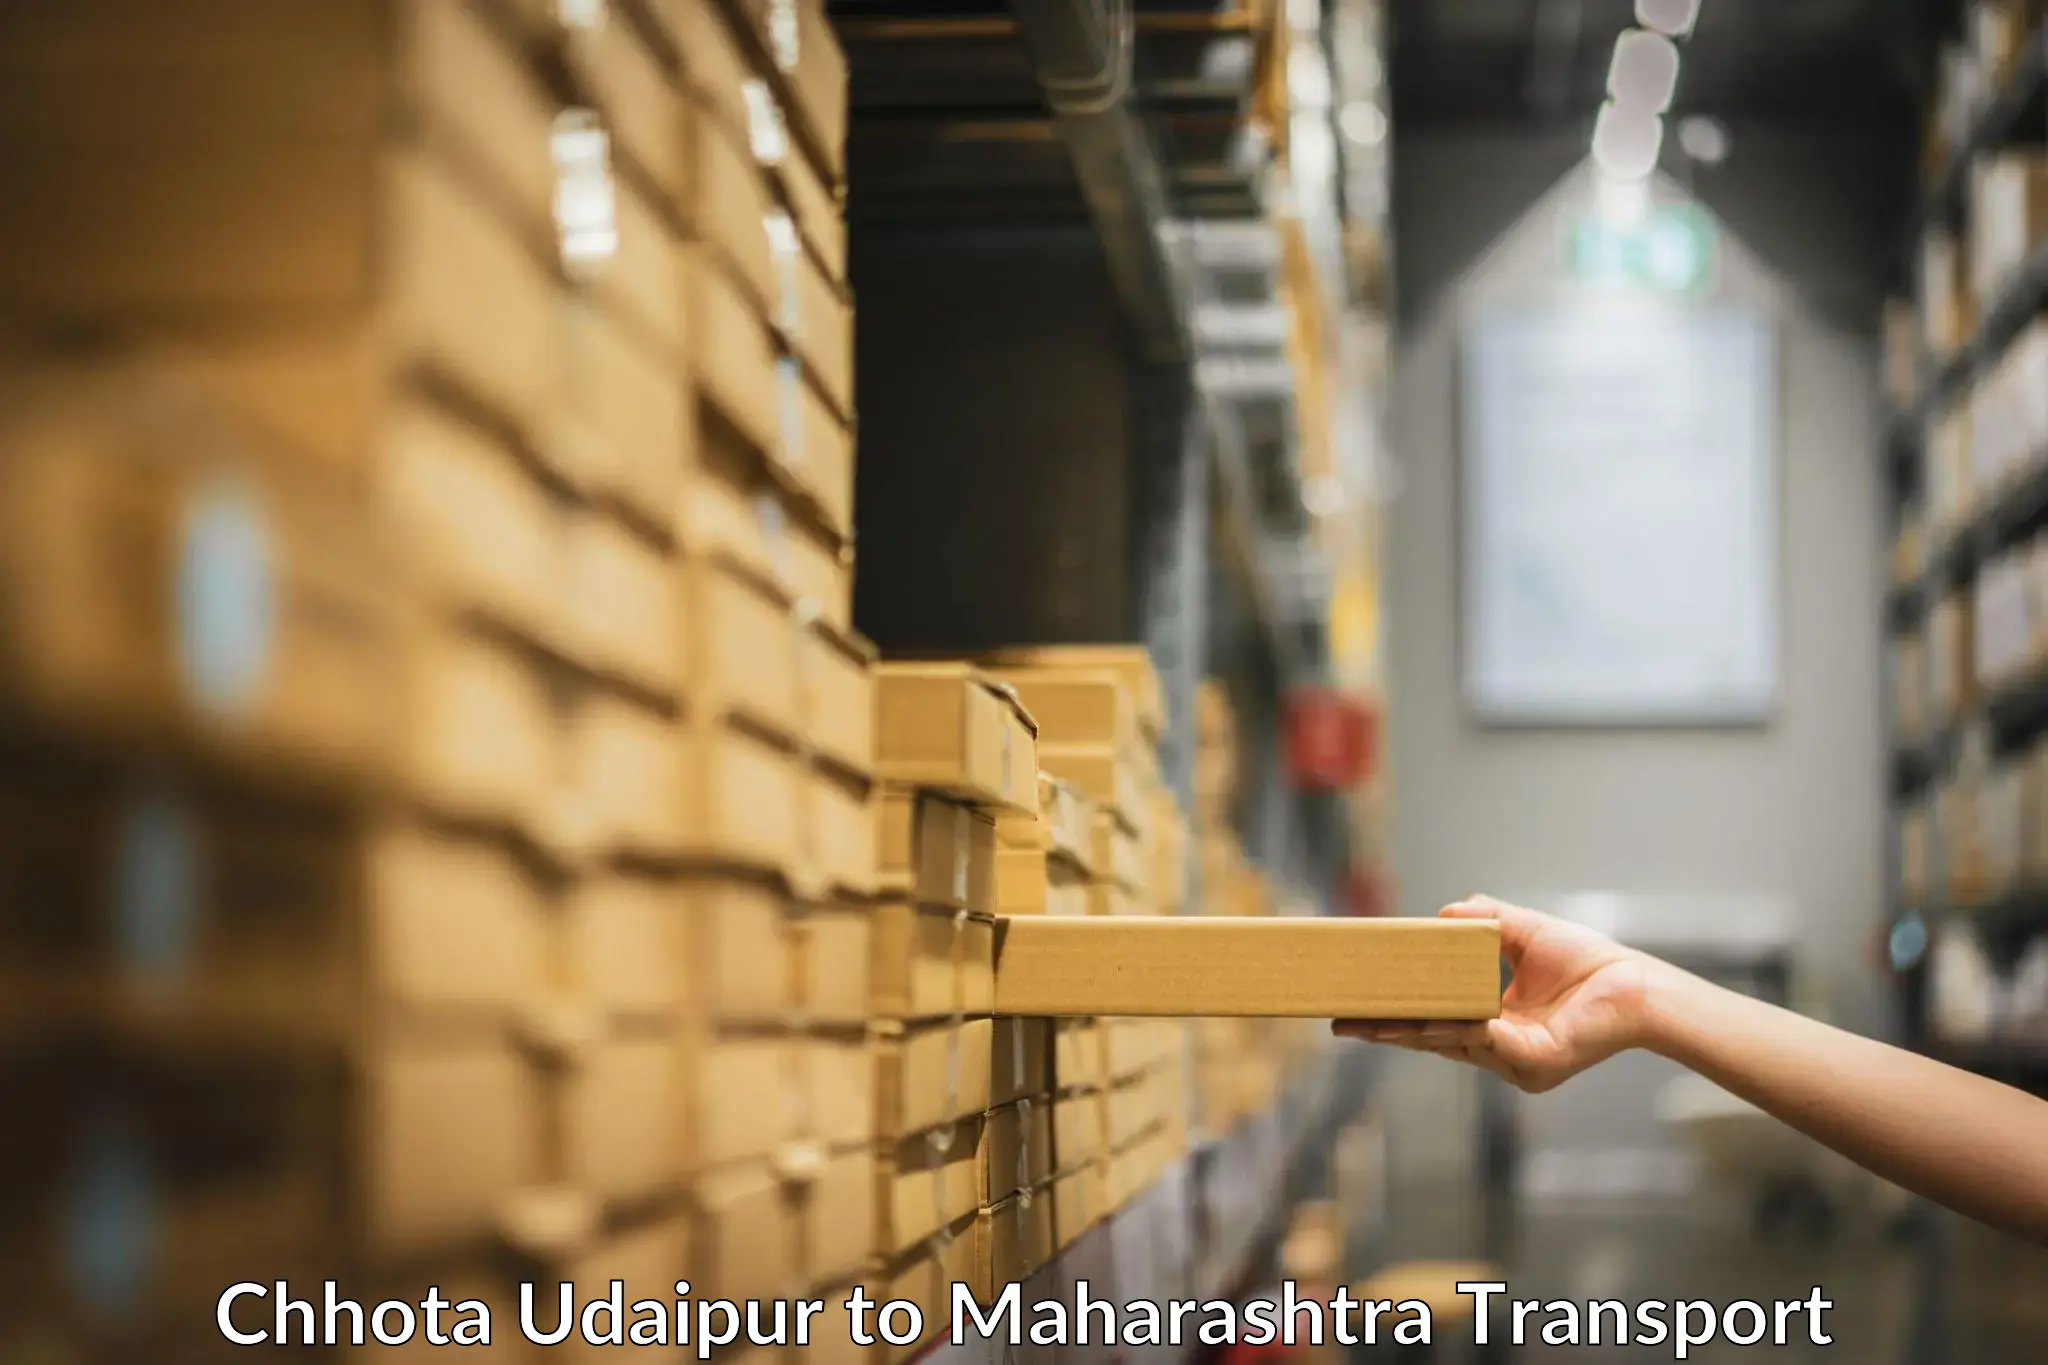 Shipping services Chhota Udaipur to Dadar